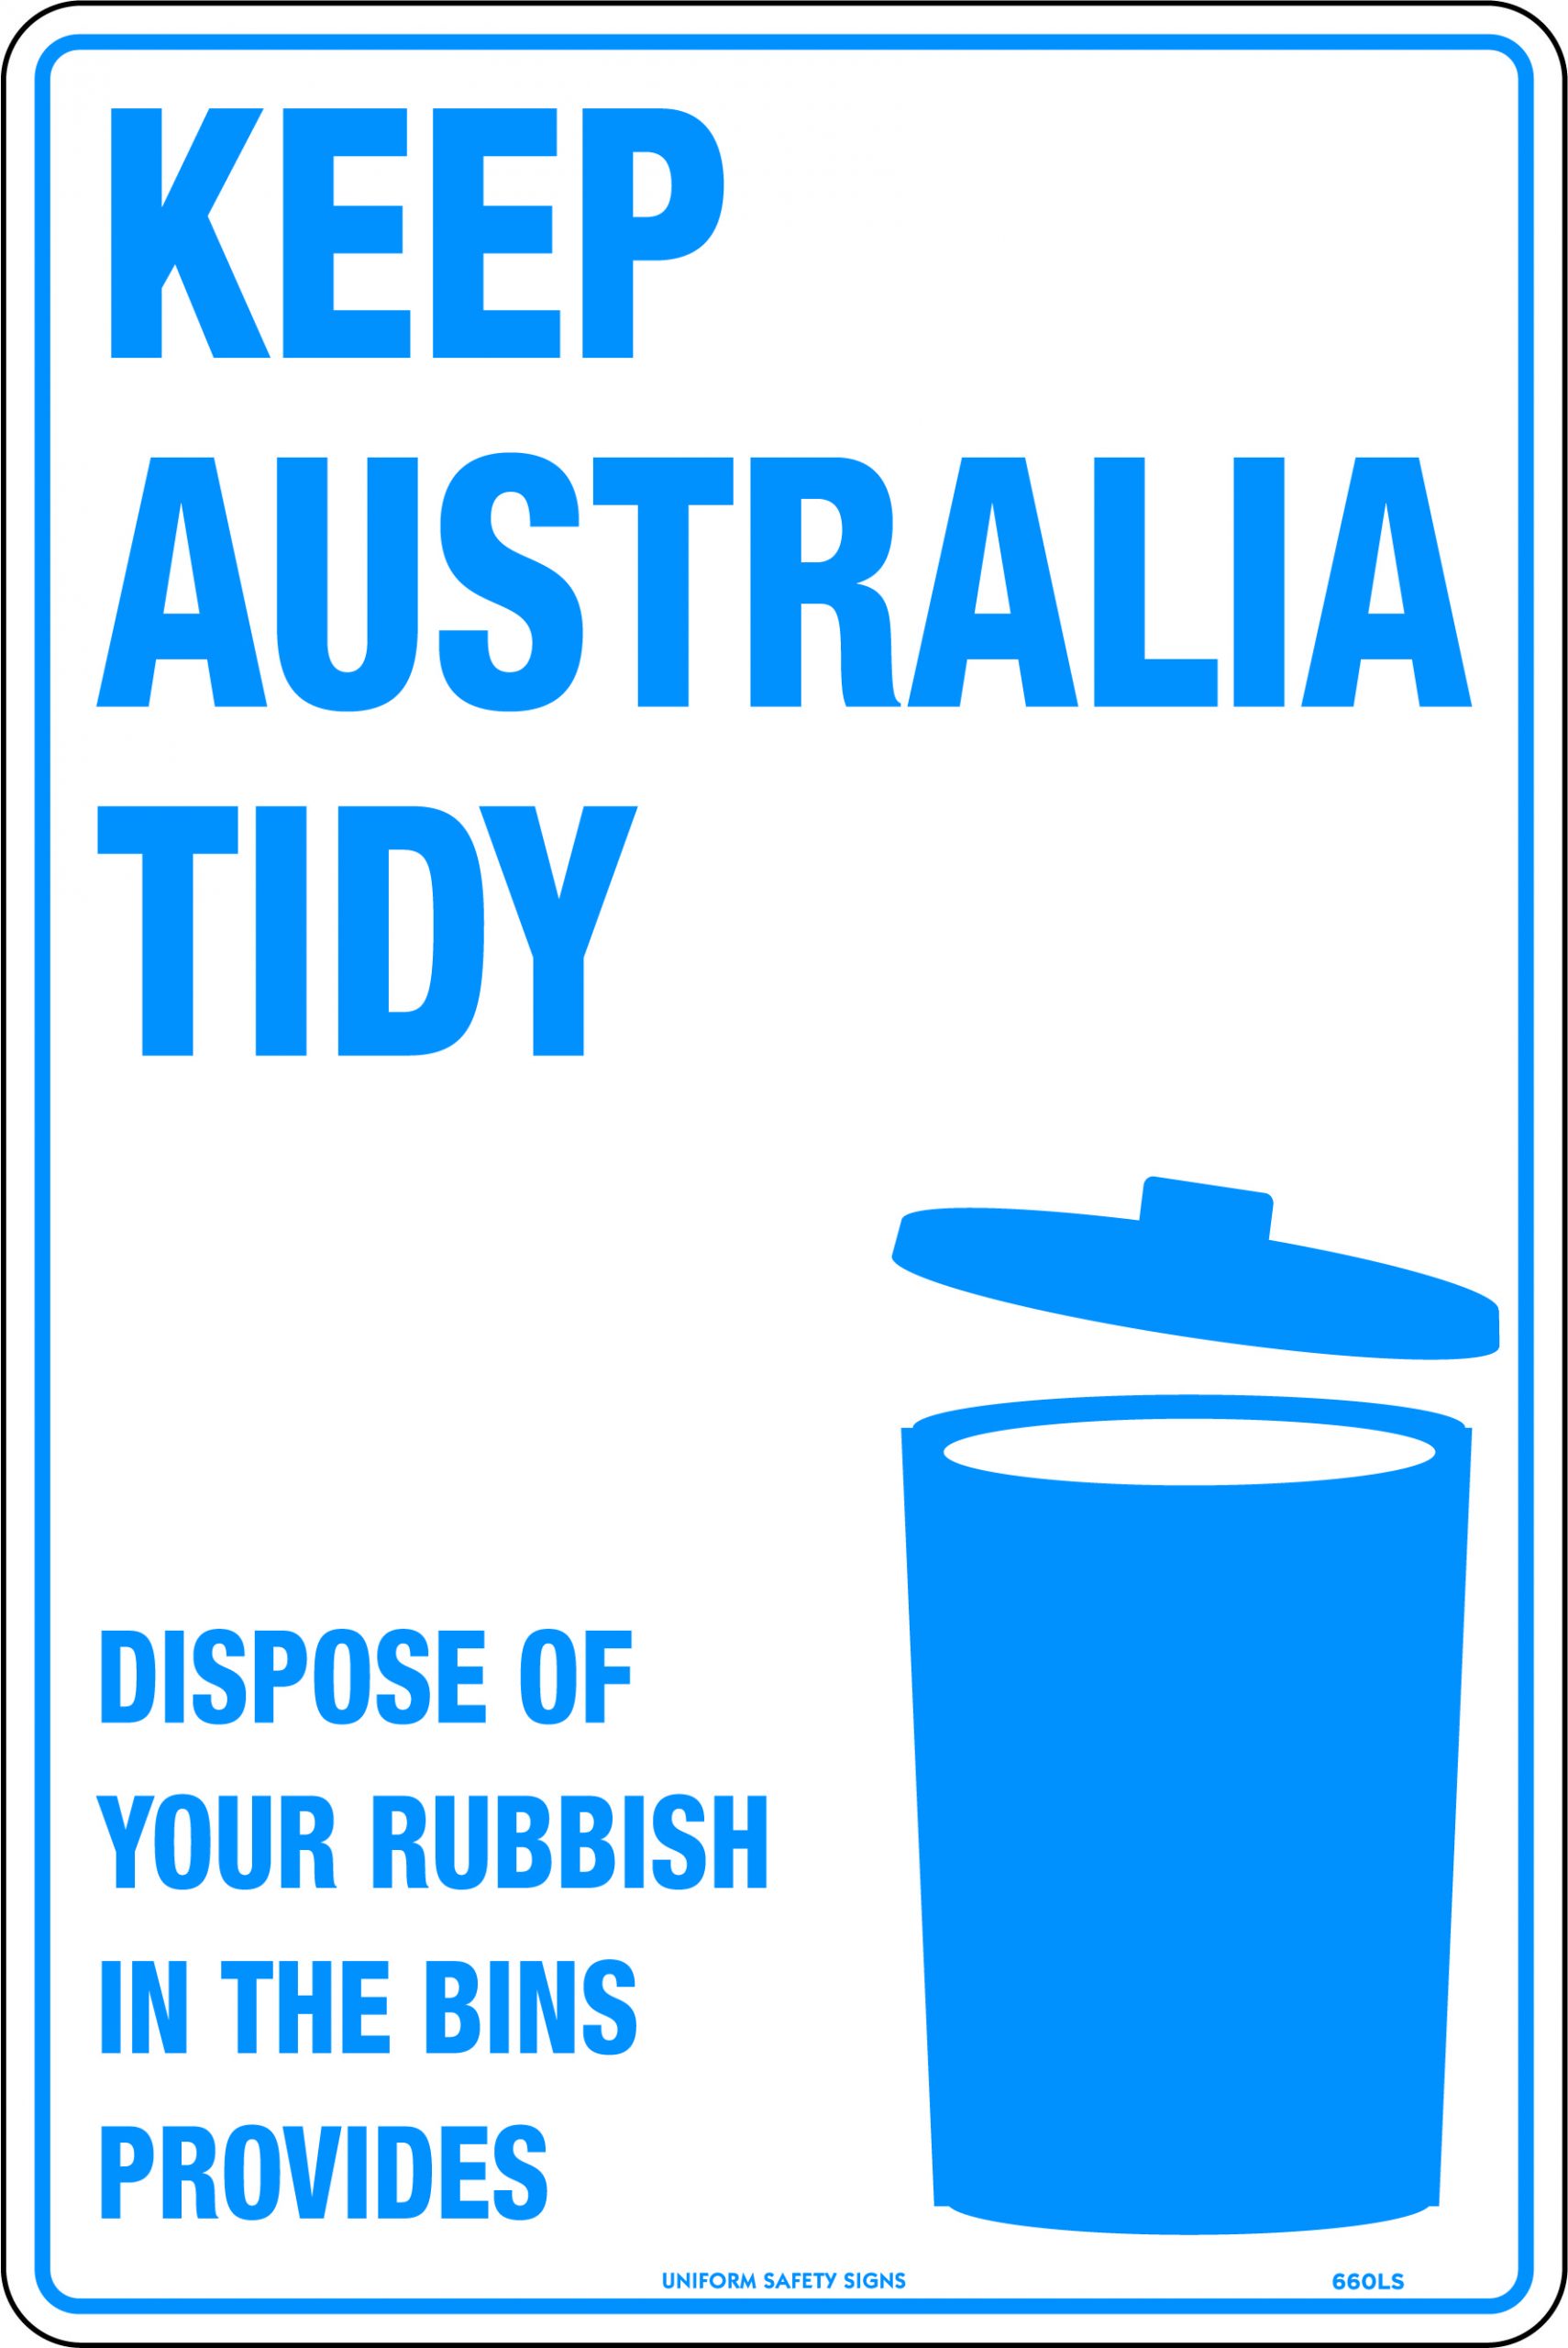 UNIFORM SAFETY 450X300MM METAL KEEP AUSTRALIA TIDY DISPOSE OF YOUR